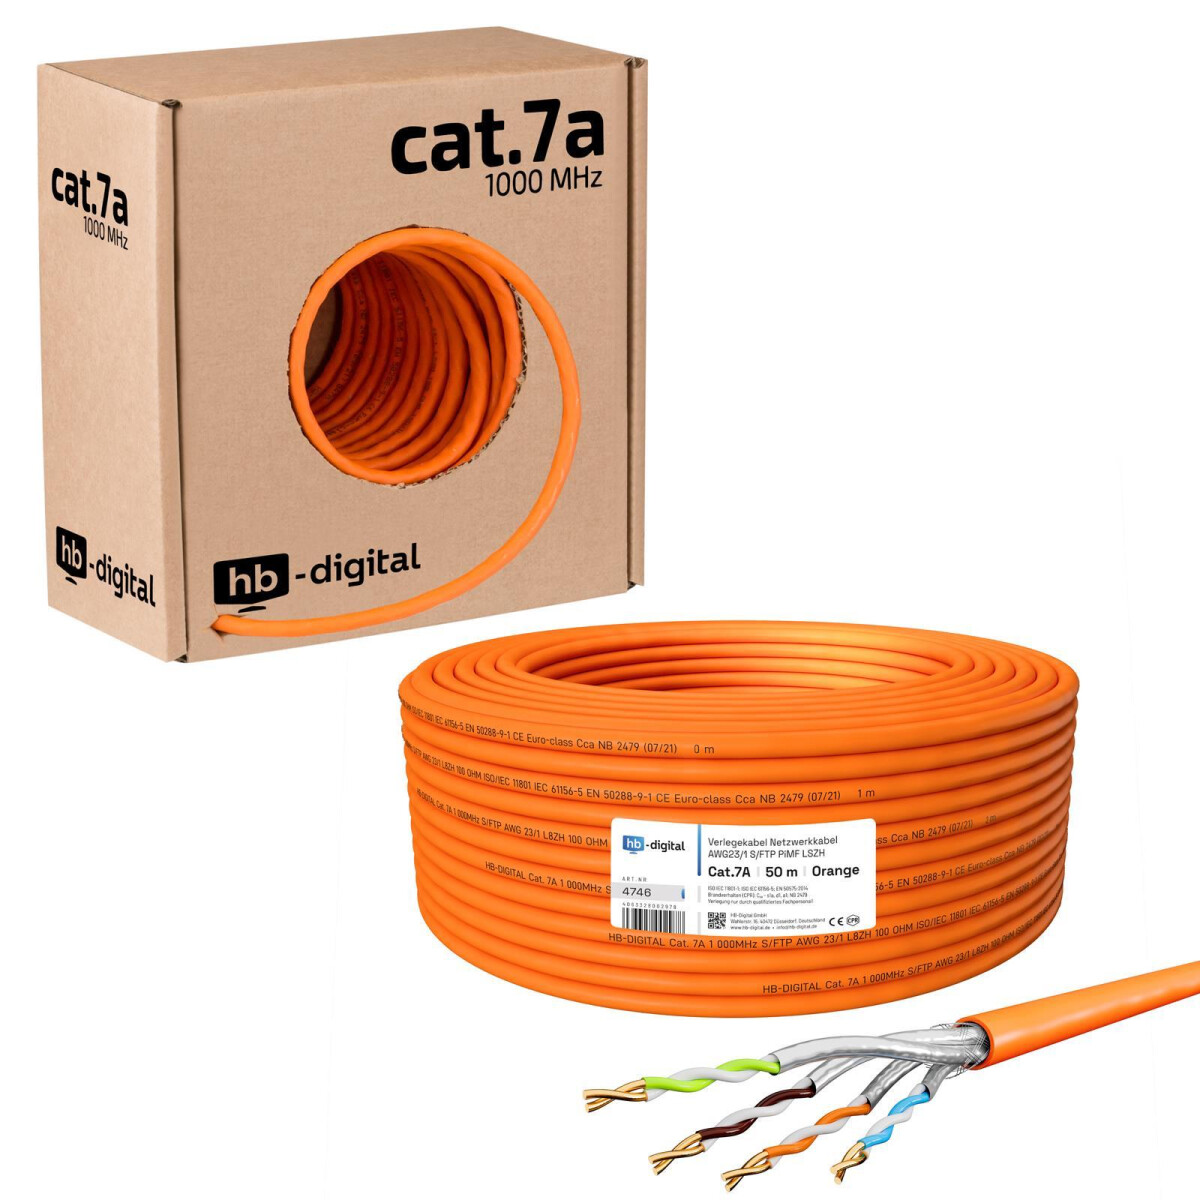 50m Network Cable CAT 8 Installation Cable blue by , 56,90 €